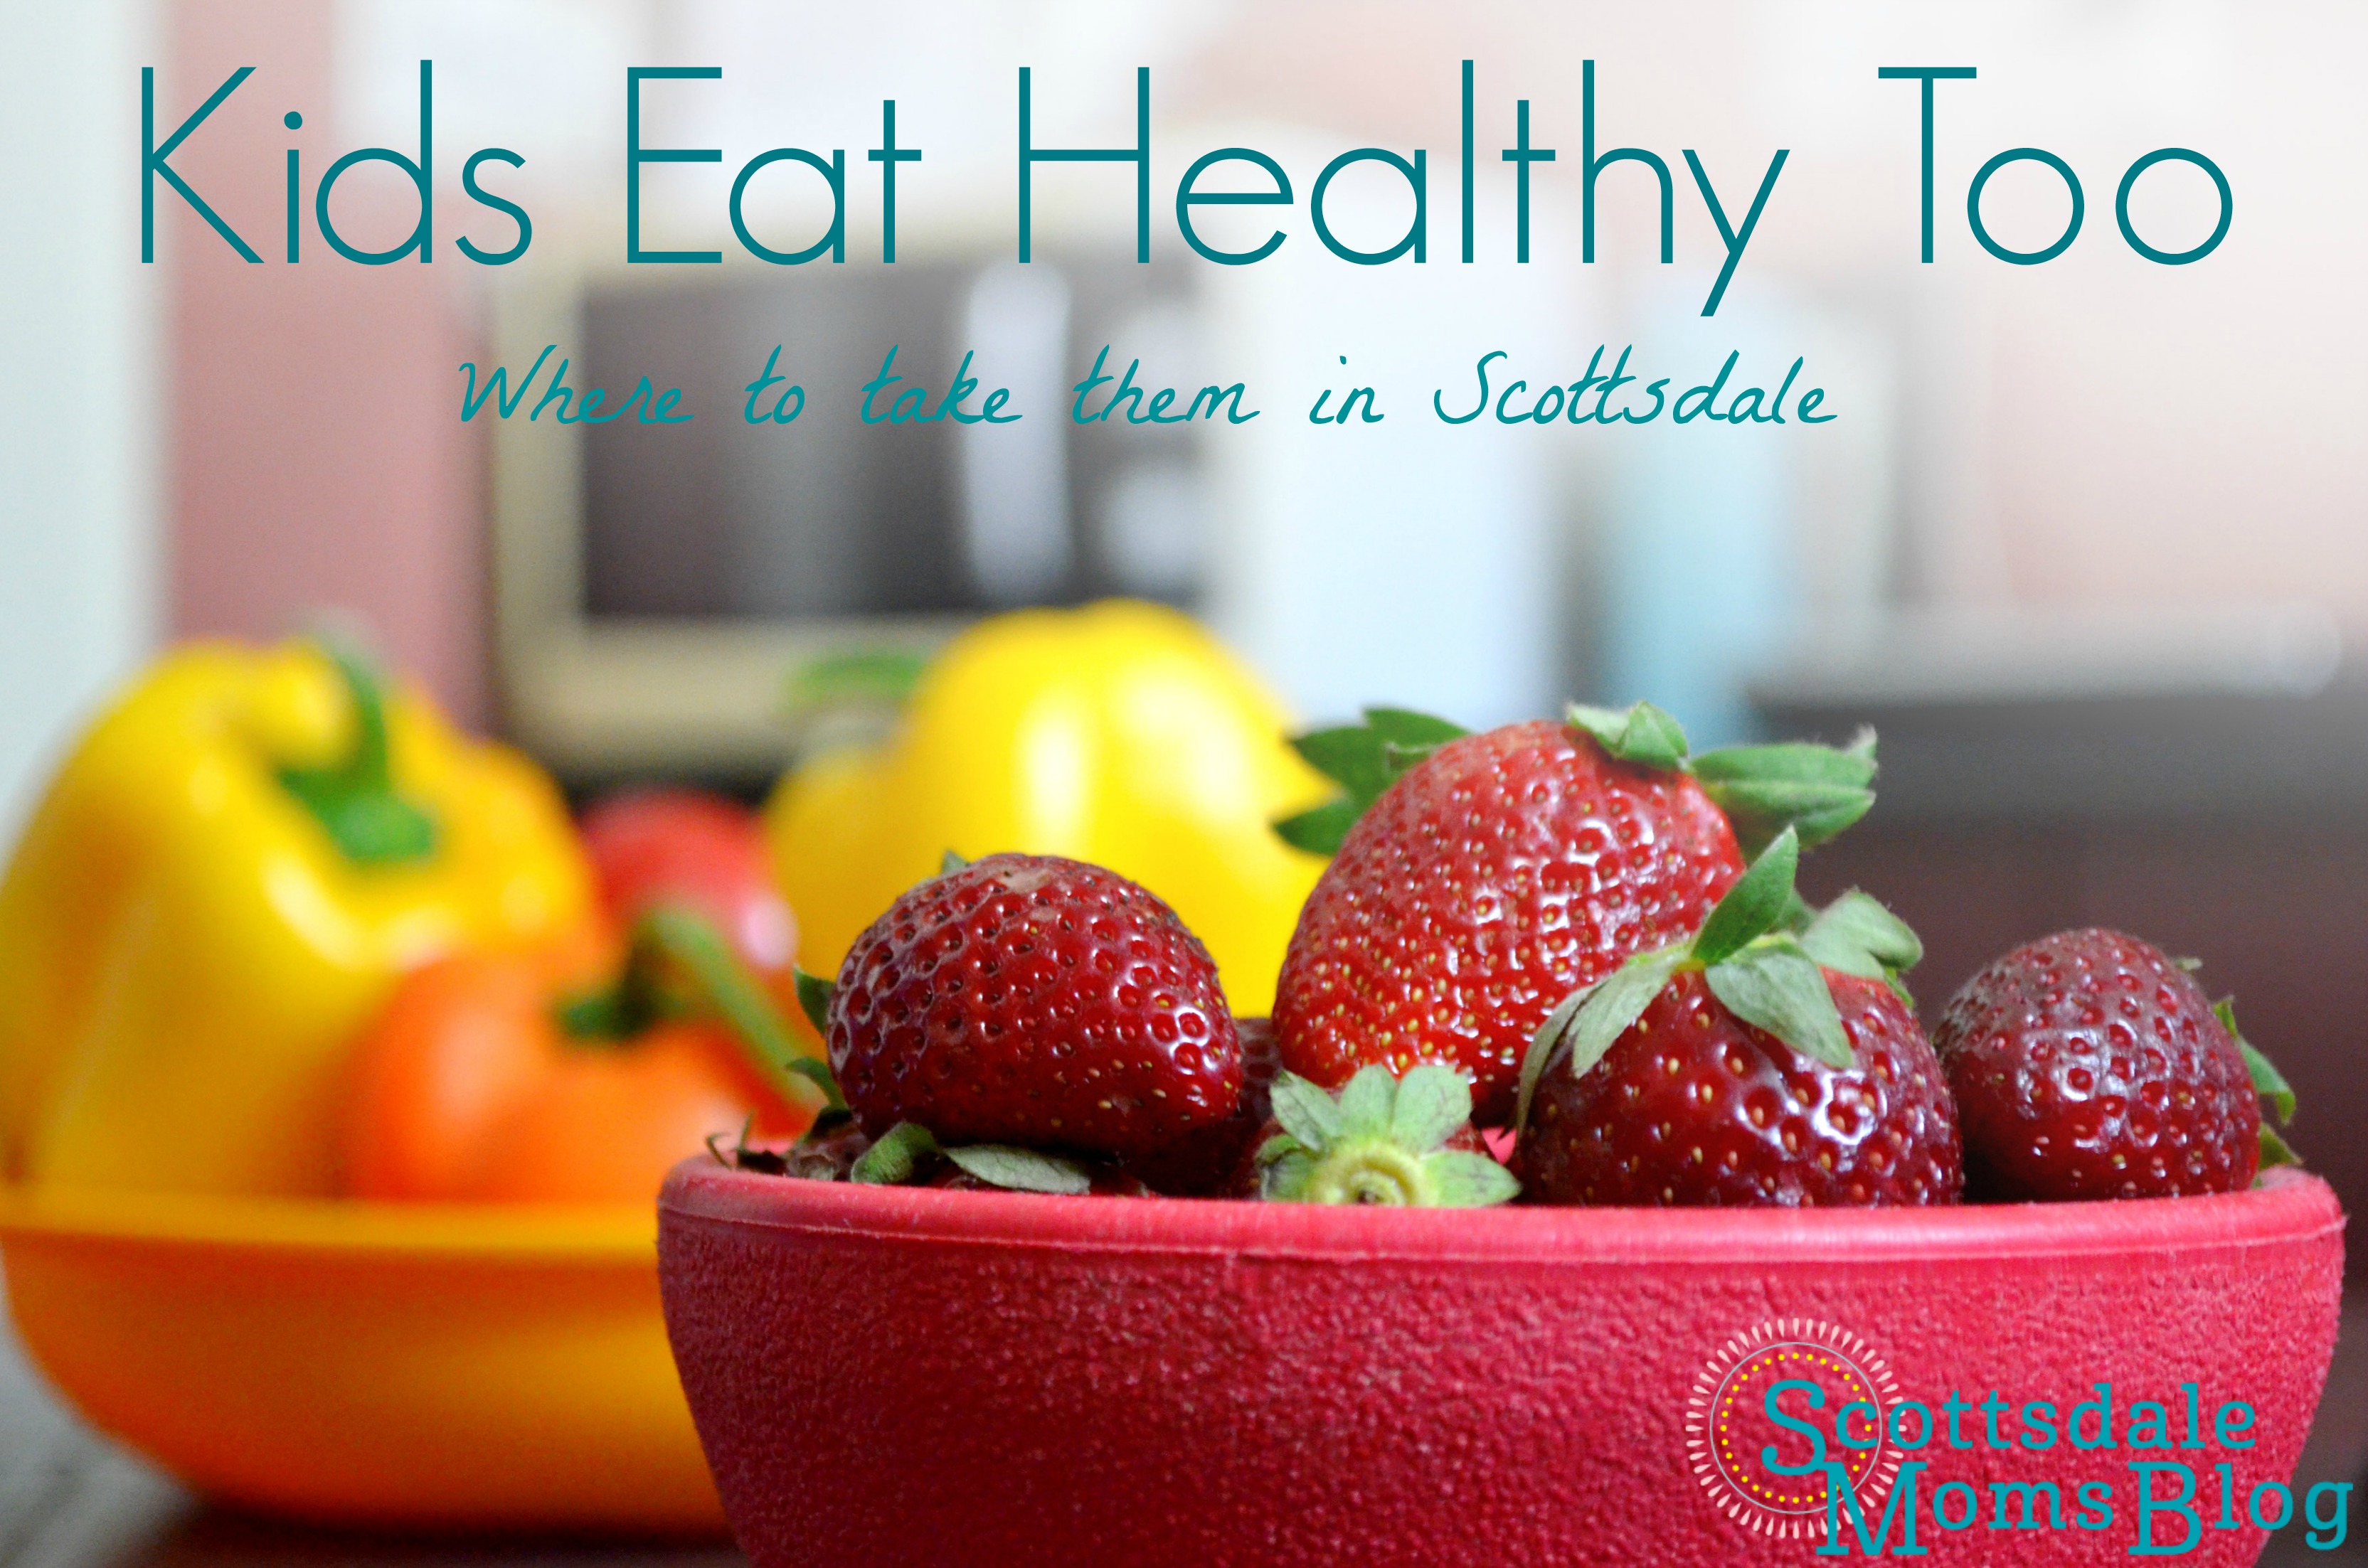 Kids Eat Healthy Too: Where to Take Them in Scottsdale